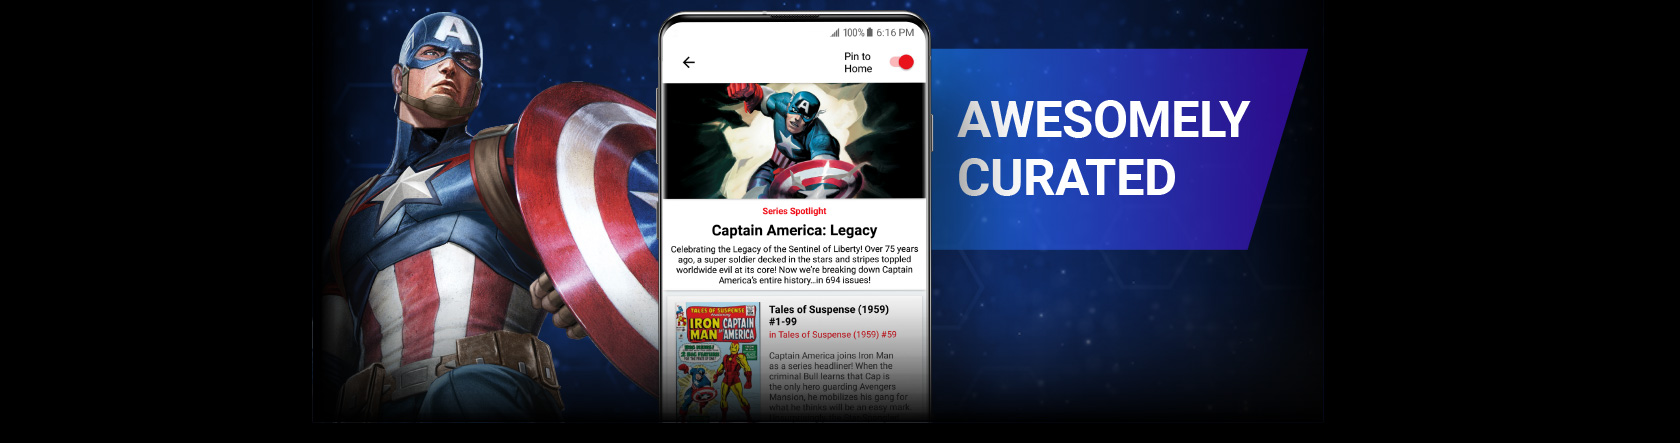 Awesomely Curated. Captain America with shield next to a screenshot of the app.